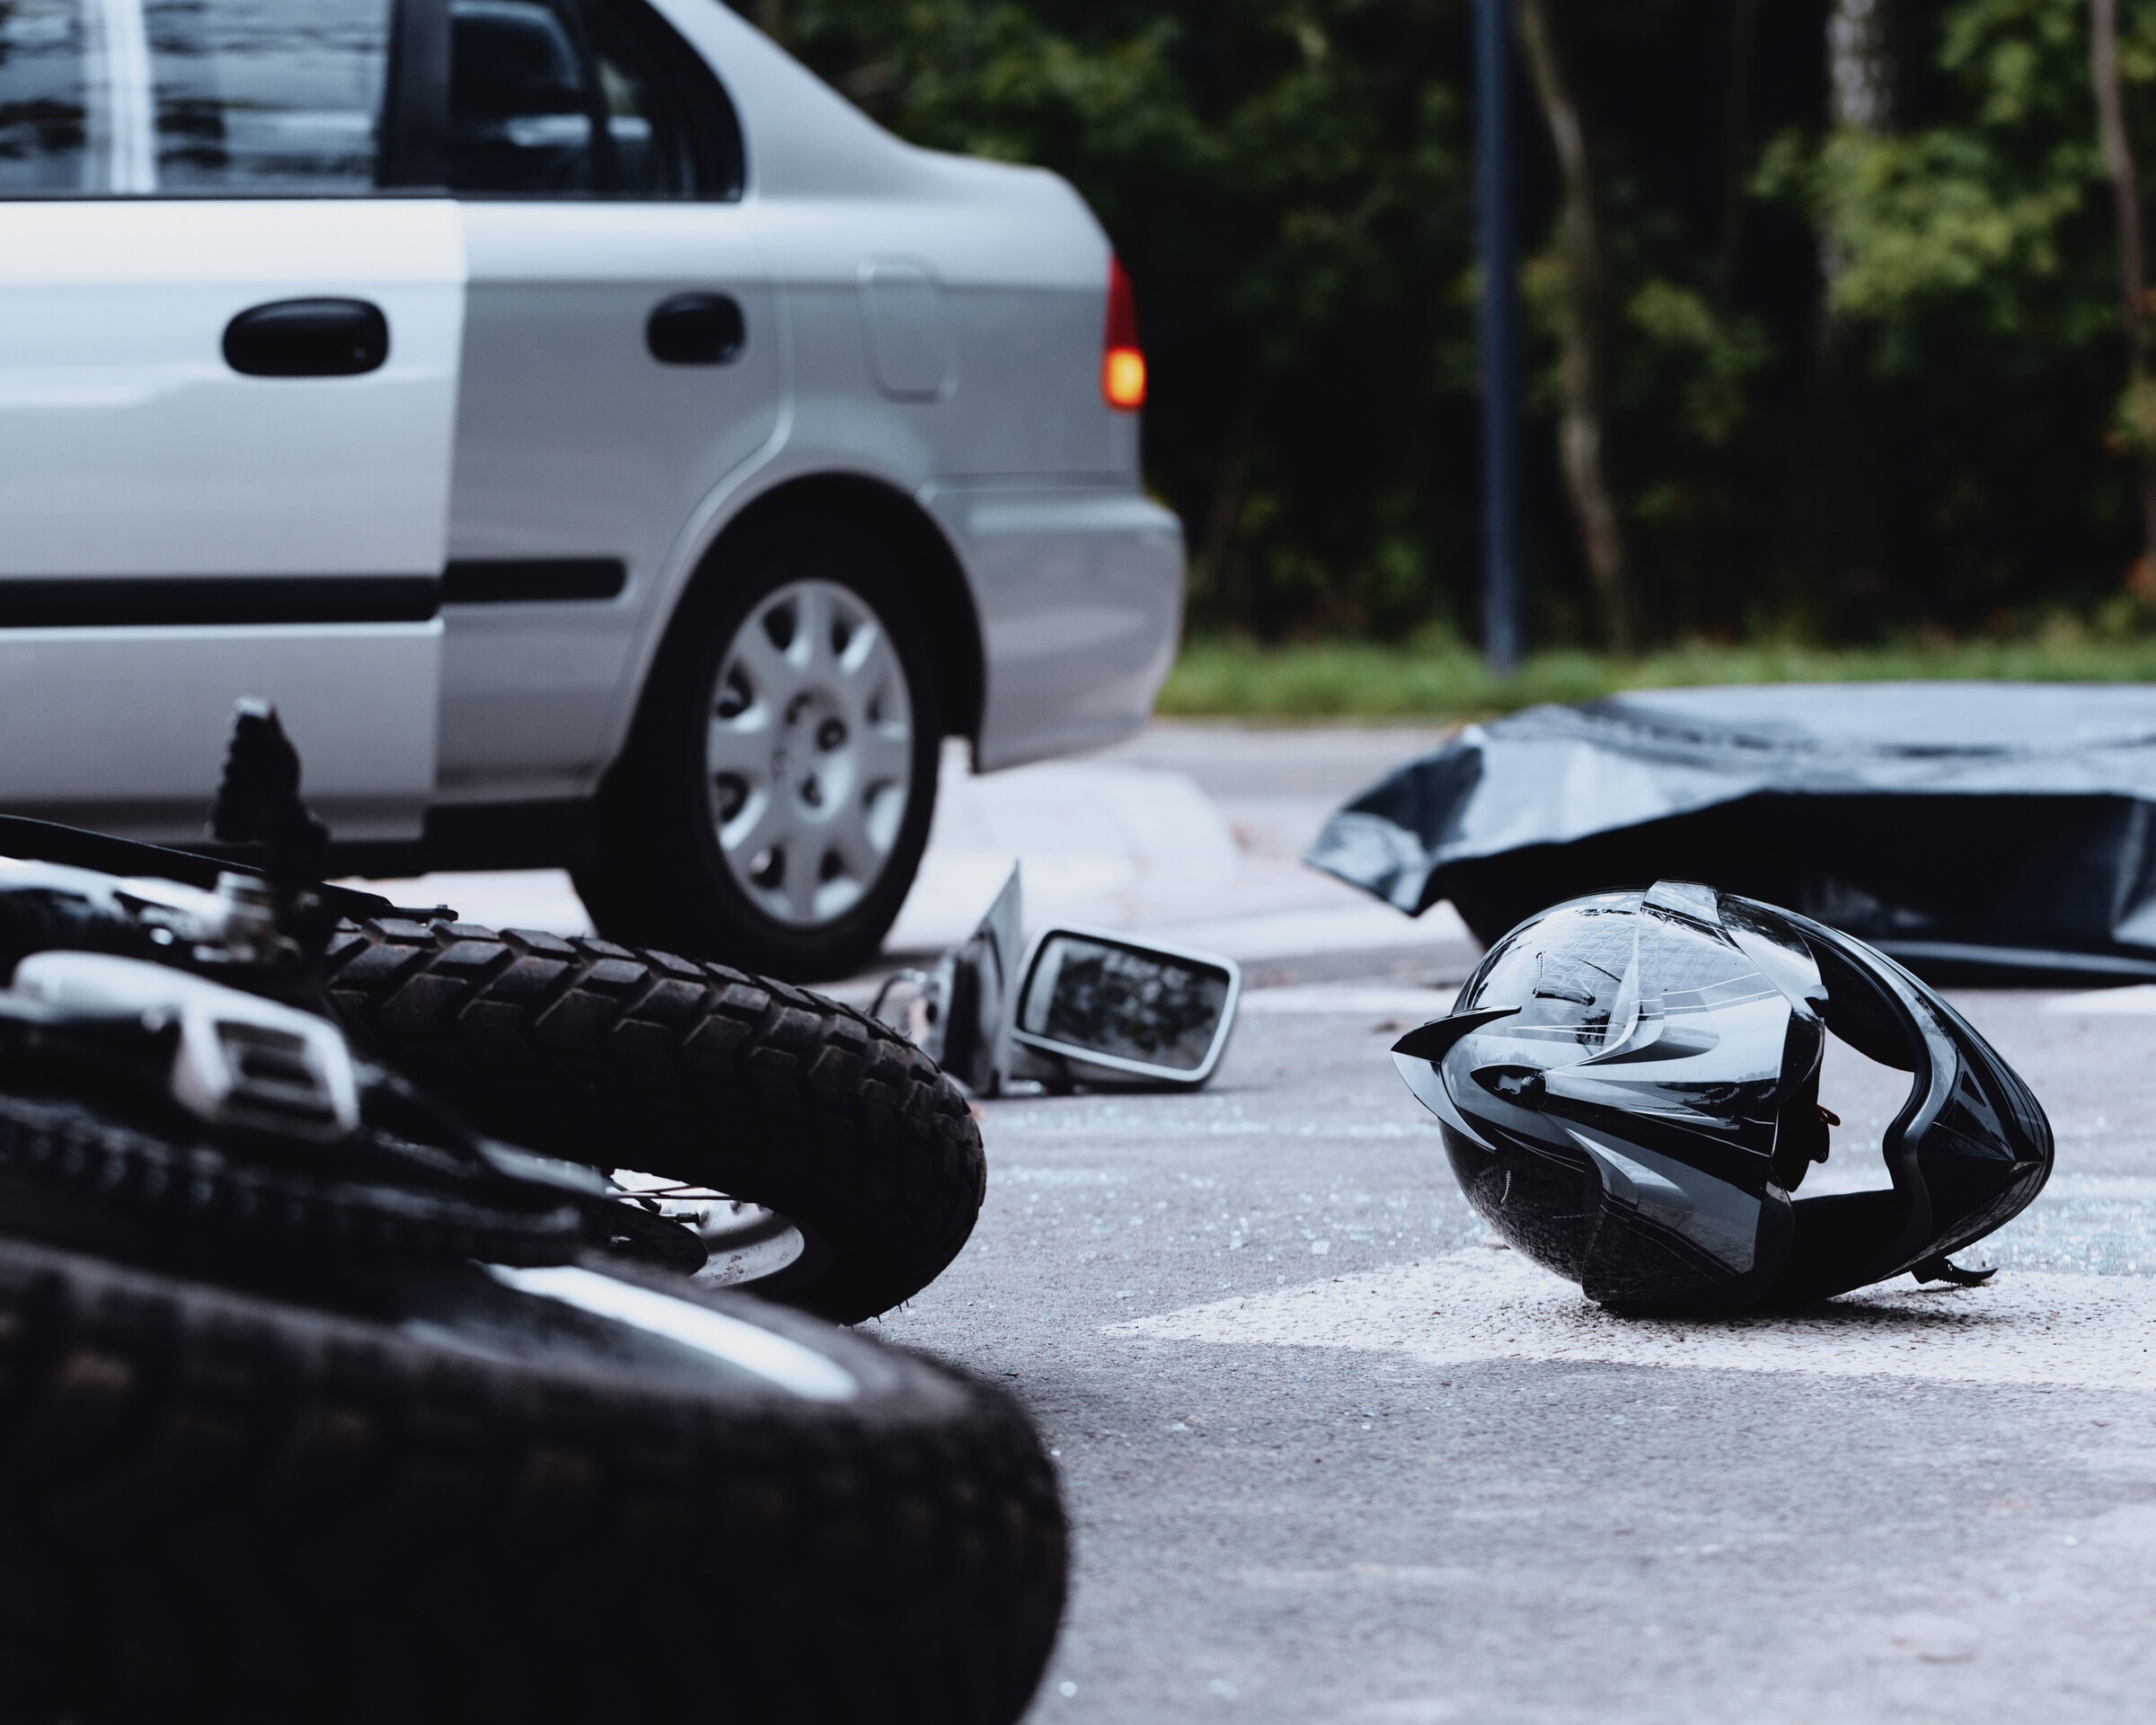 Reliable lawyers who are dedicated to providing support and guidance to those affected by car and motor vehicle accidents in Azle